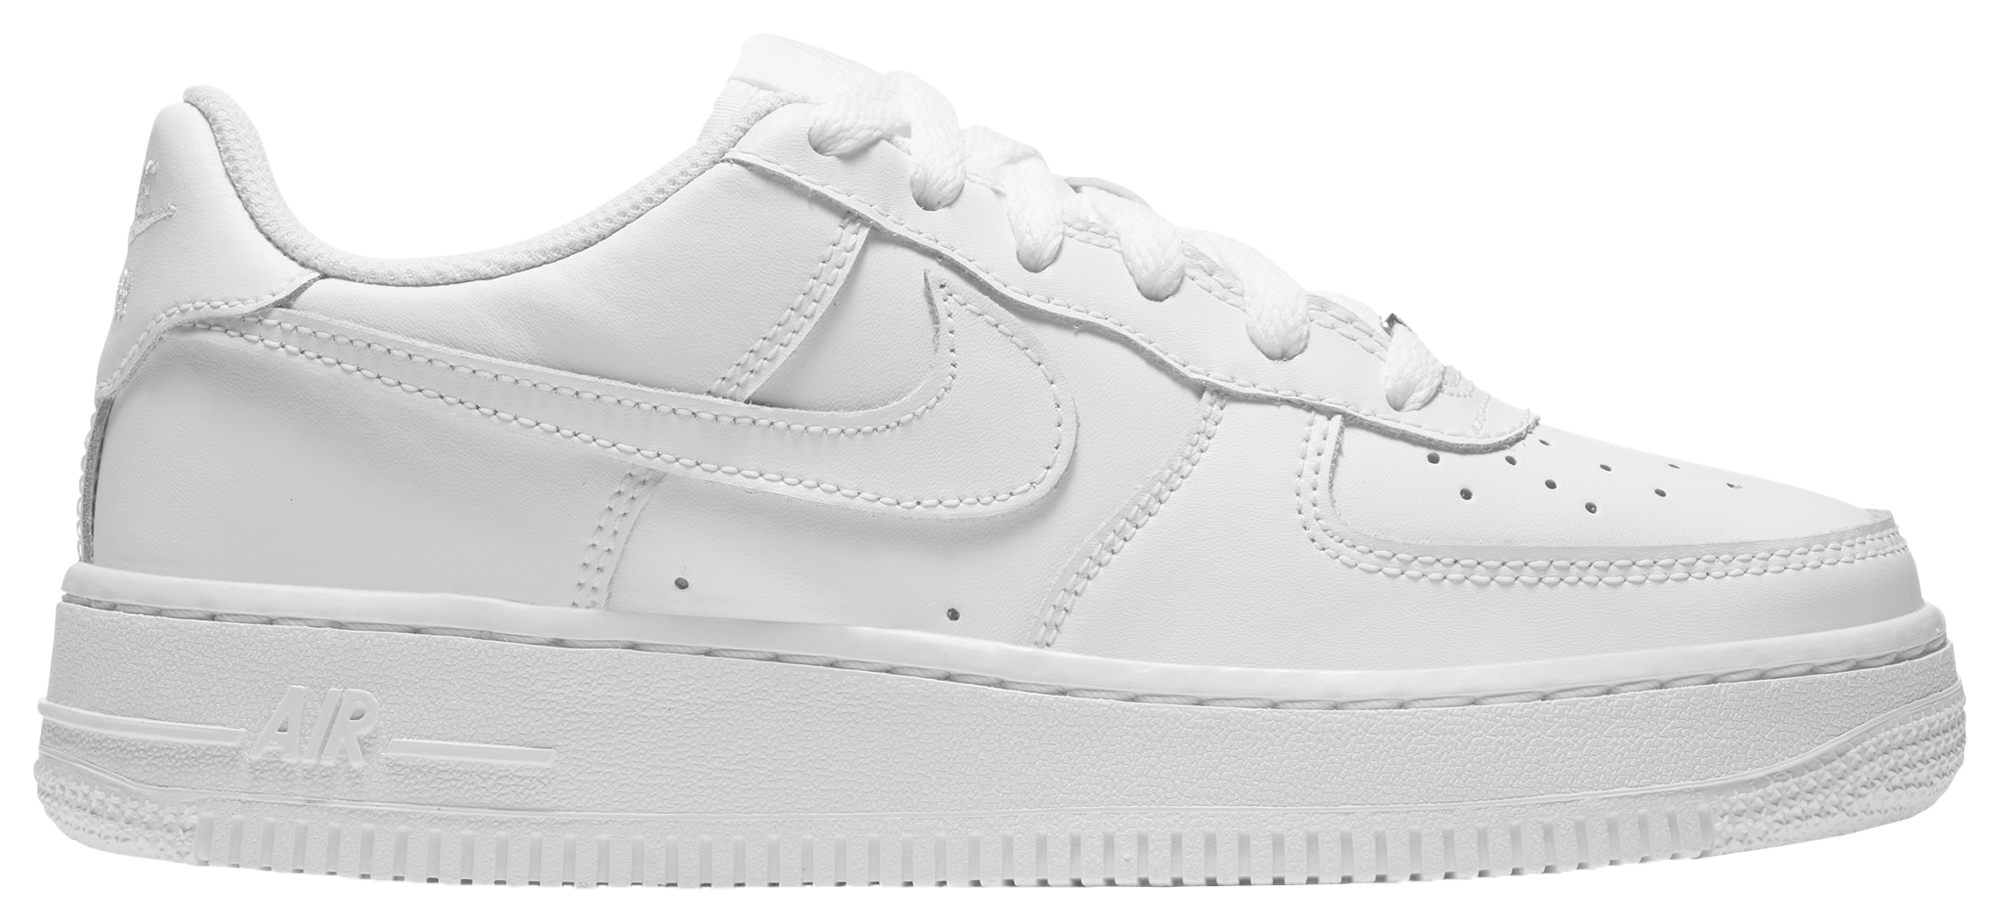 air force 1 price canada